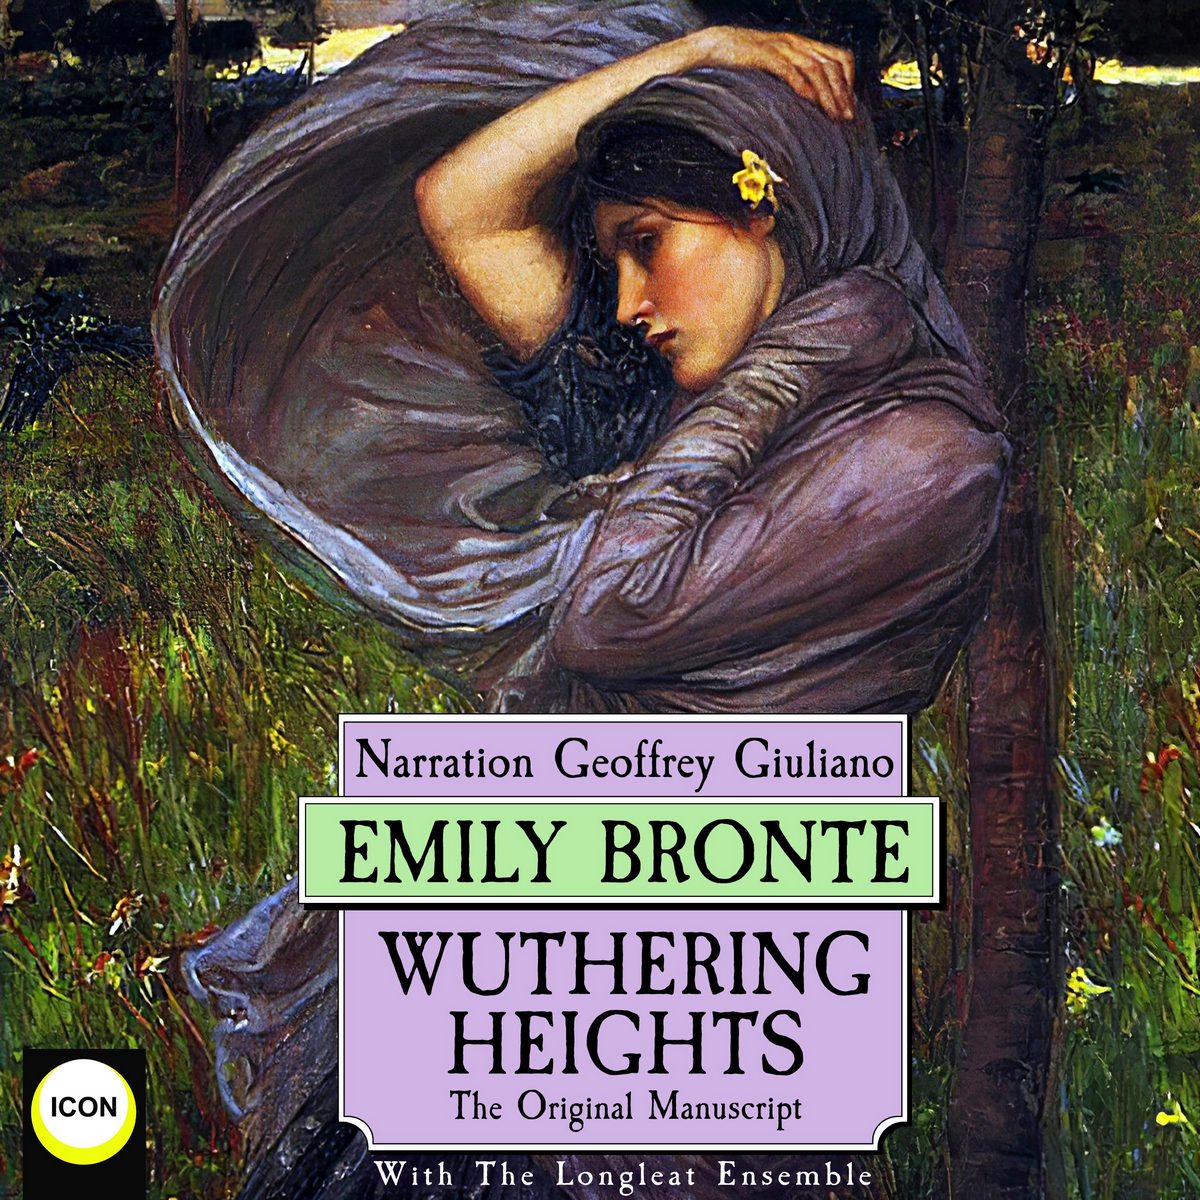 Wuthering Heights The Original Manuscript